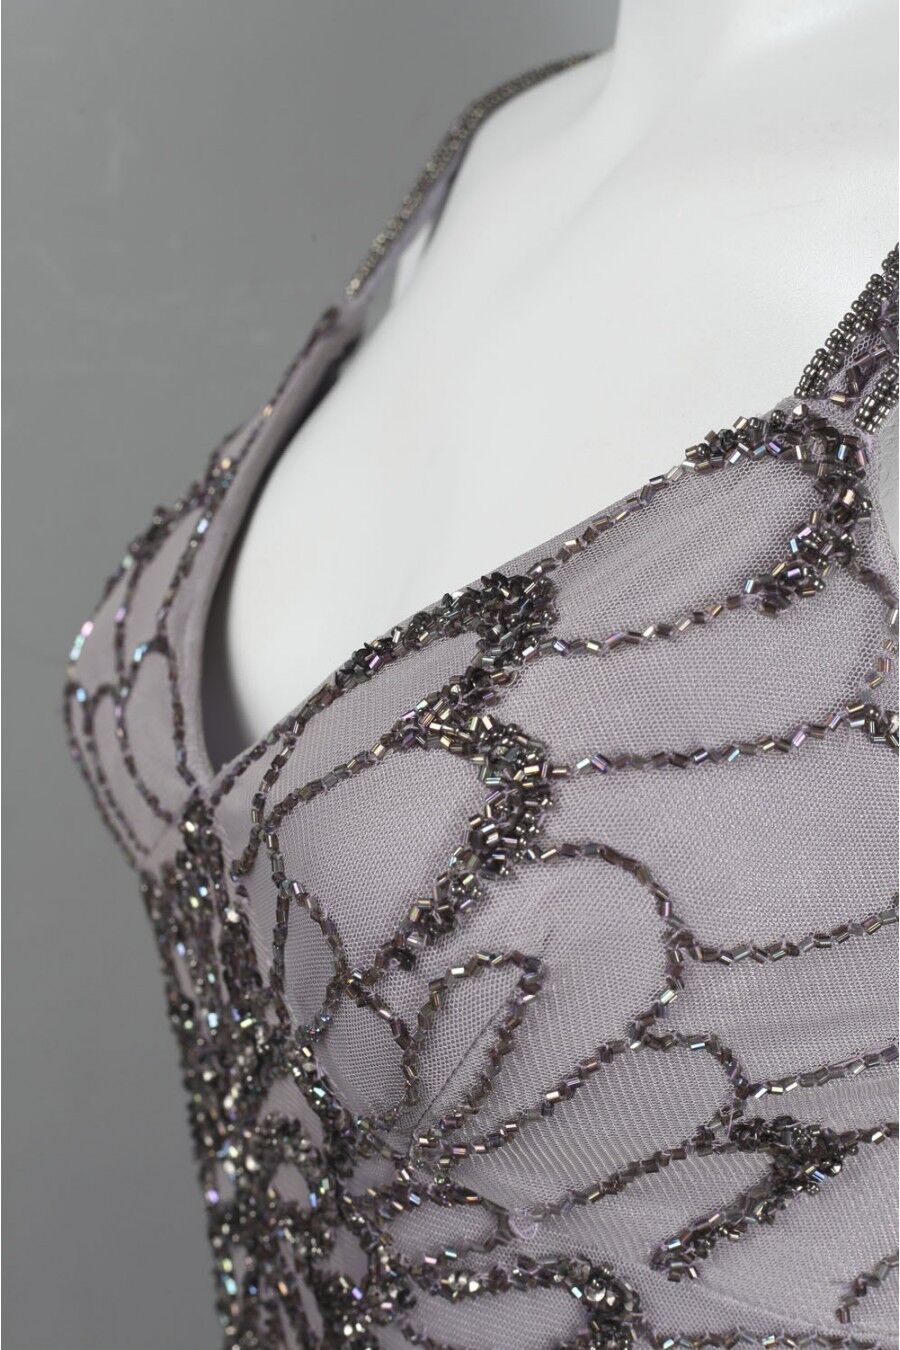 Pre-owned Adrianna Papell Heather Grey Beaded Backless Mesh Art Deco Gown Size 10 $376 In Gray